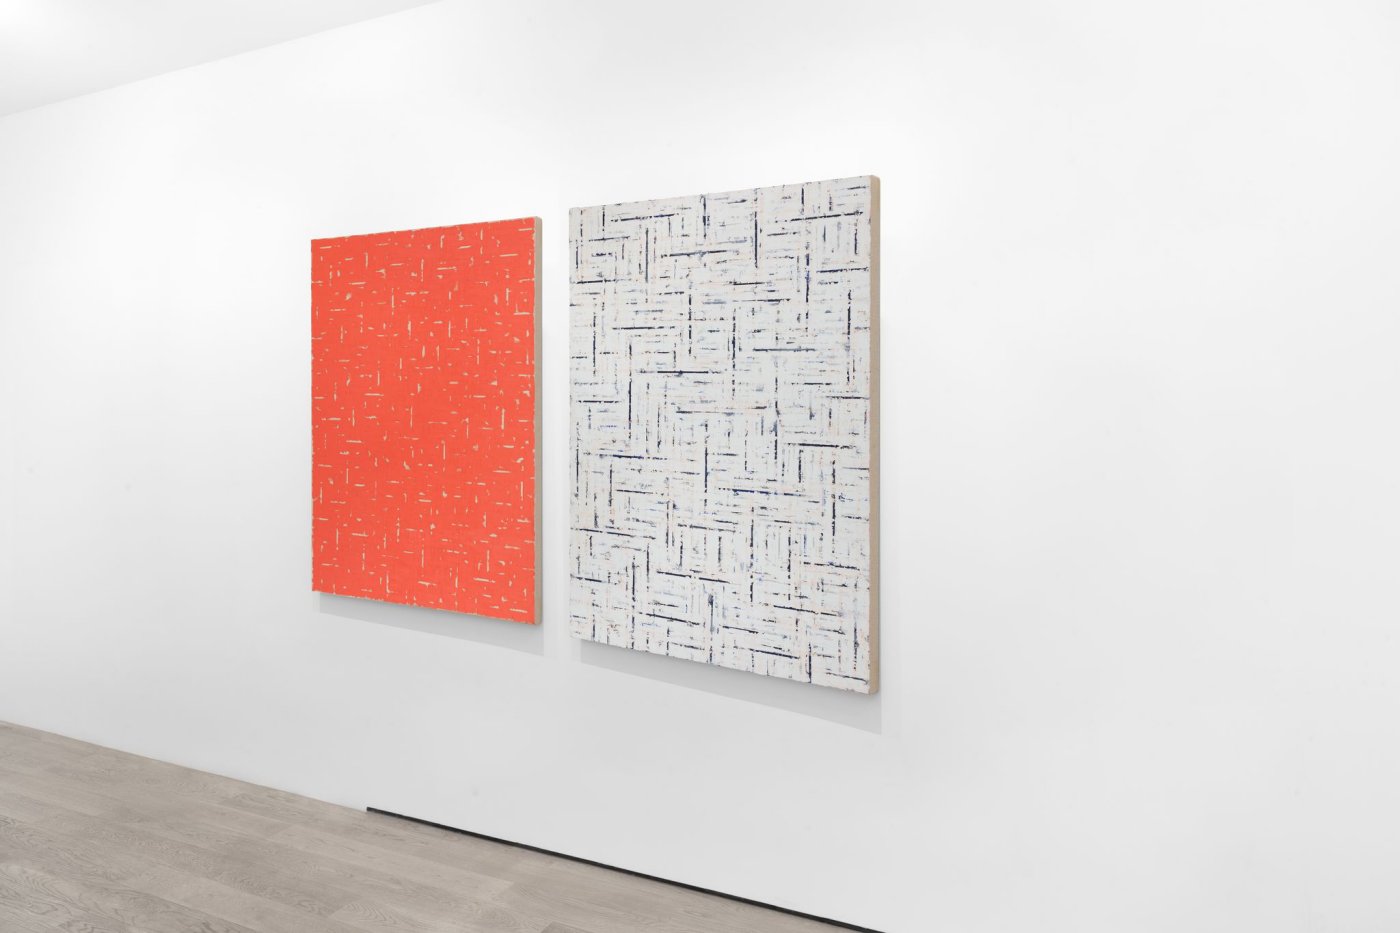 Installation image for Choi Myoung Young: Conditional Planes, at Almine Rech